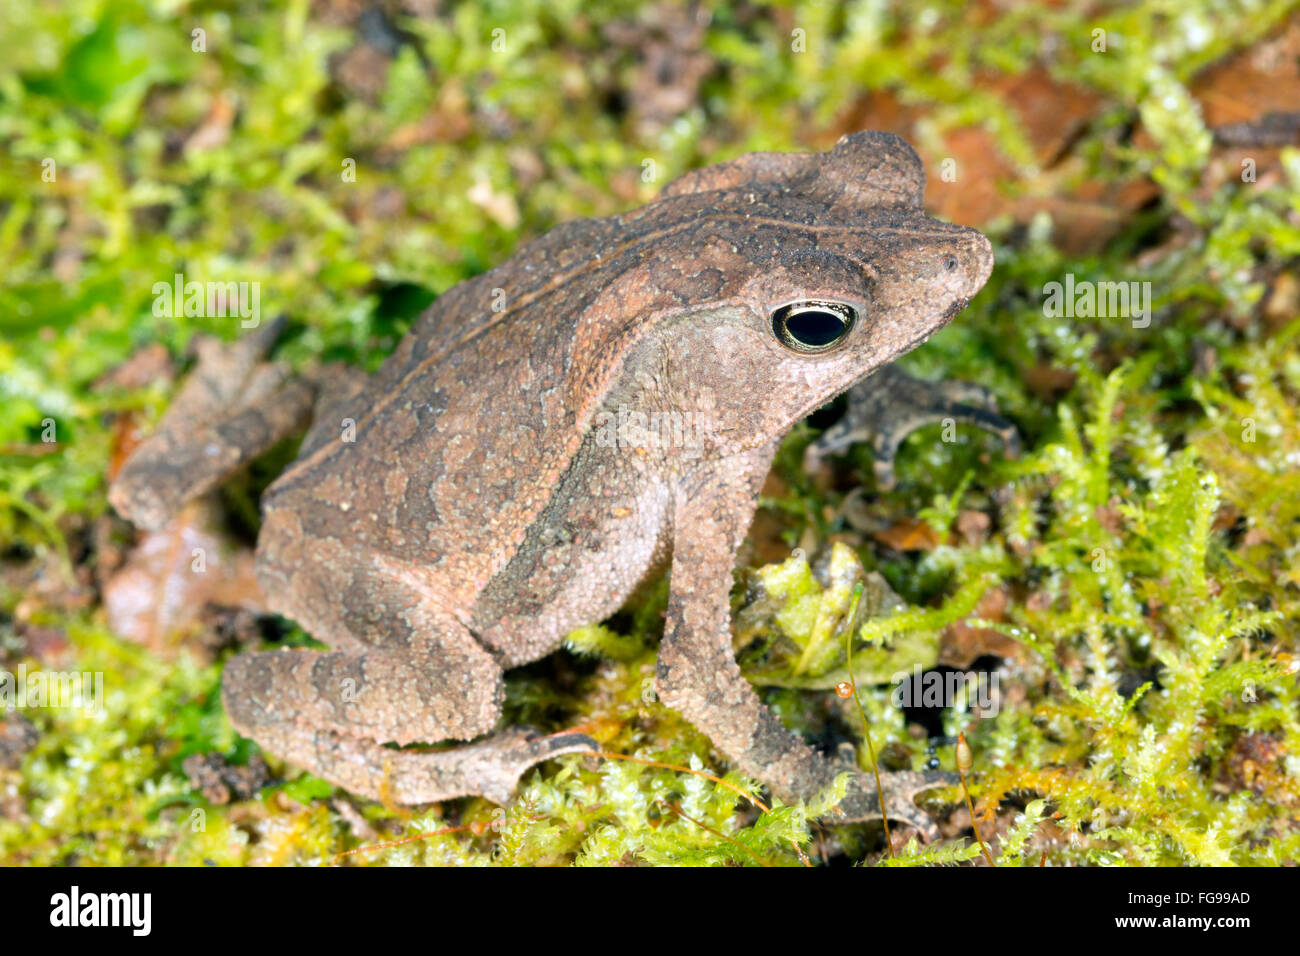 Crested Forest Toad (Rhinella margaritifera) on the rainforest floor in Pastaza province in the Ecuadorian Amazon Stock Photo